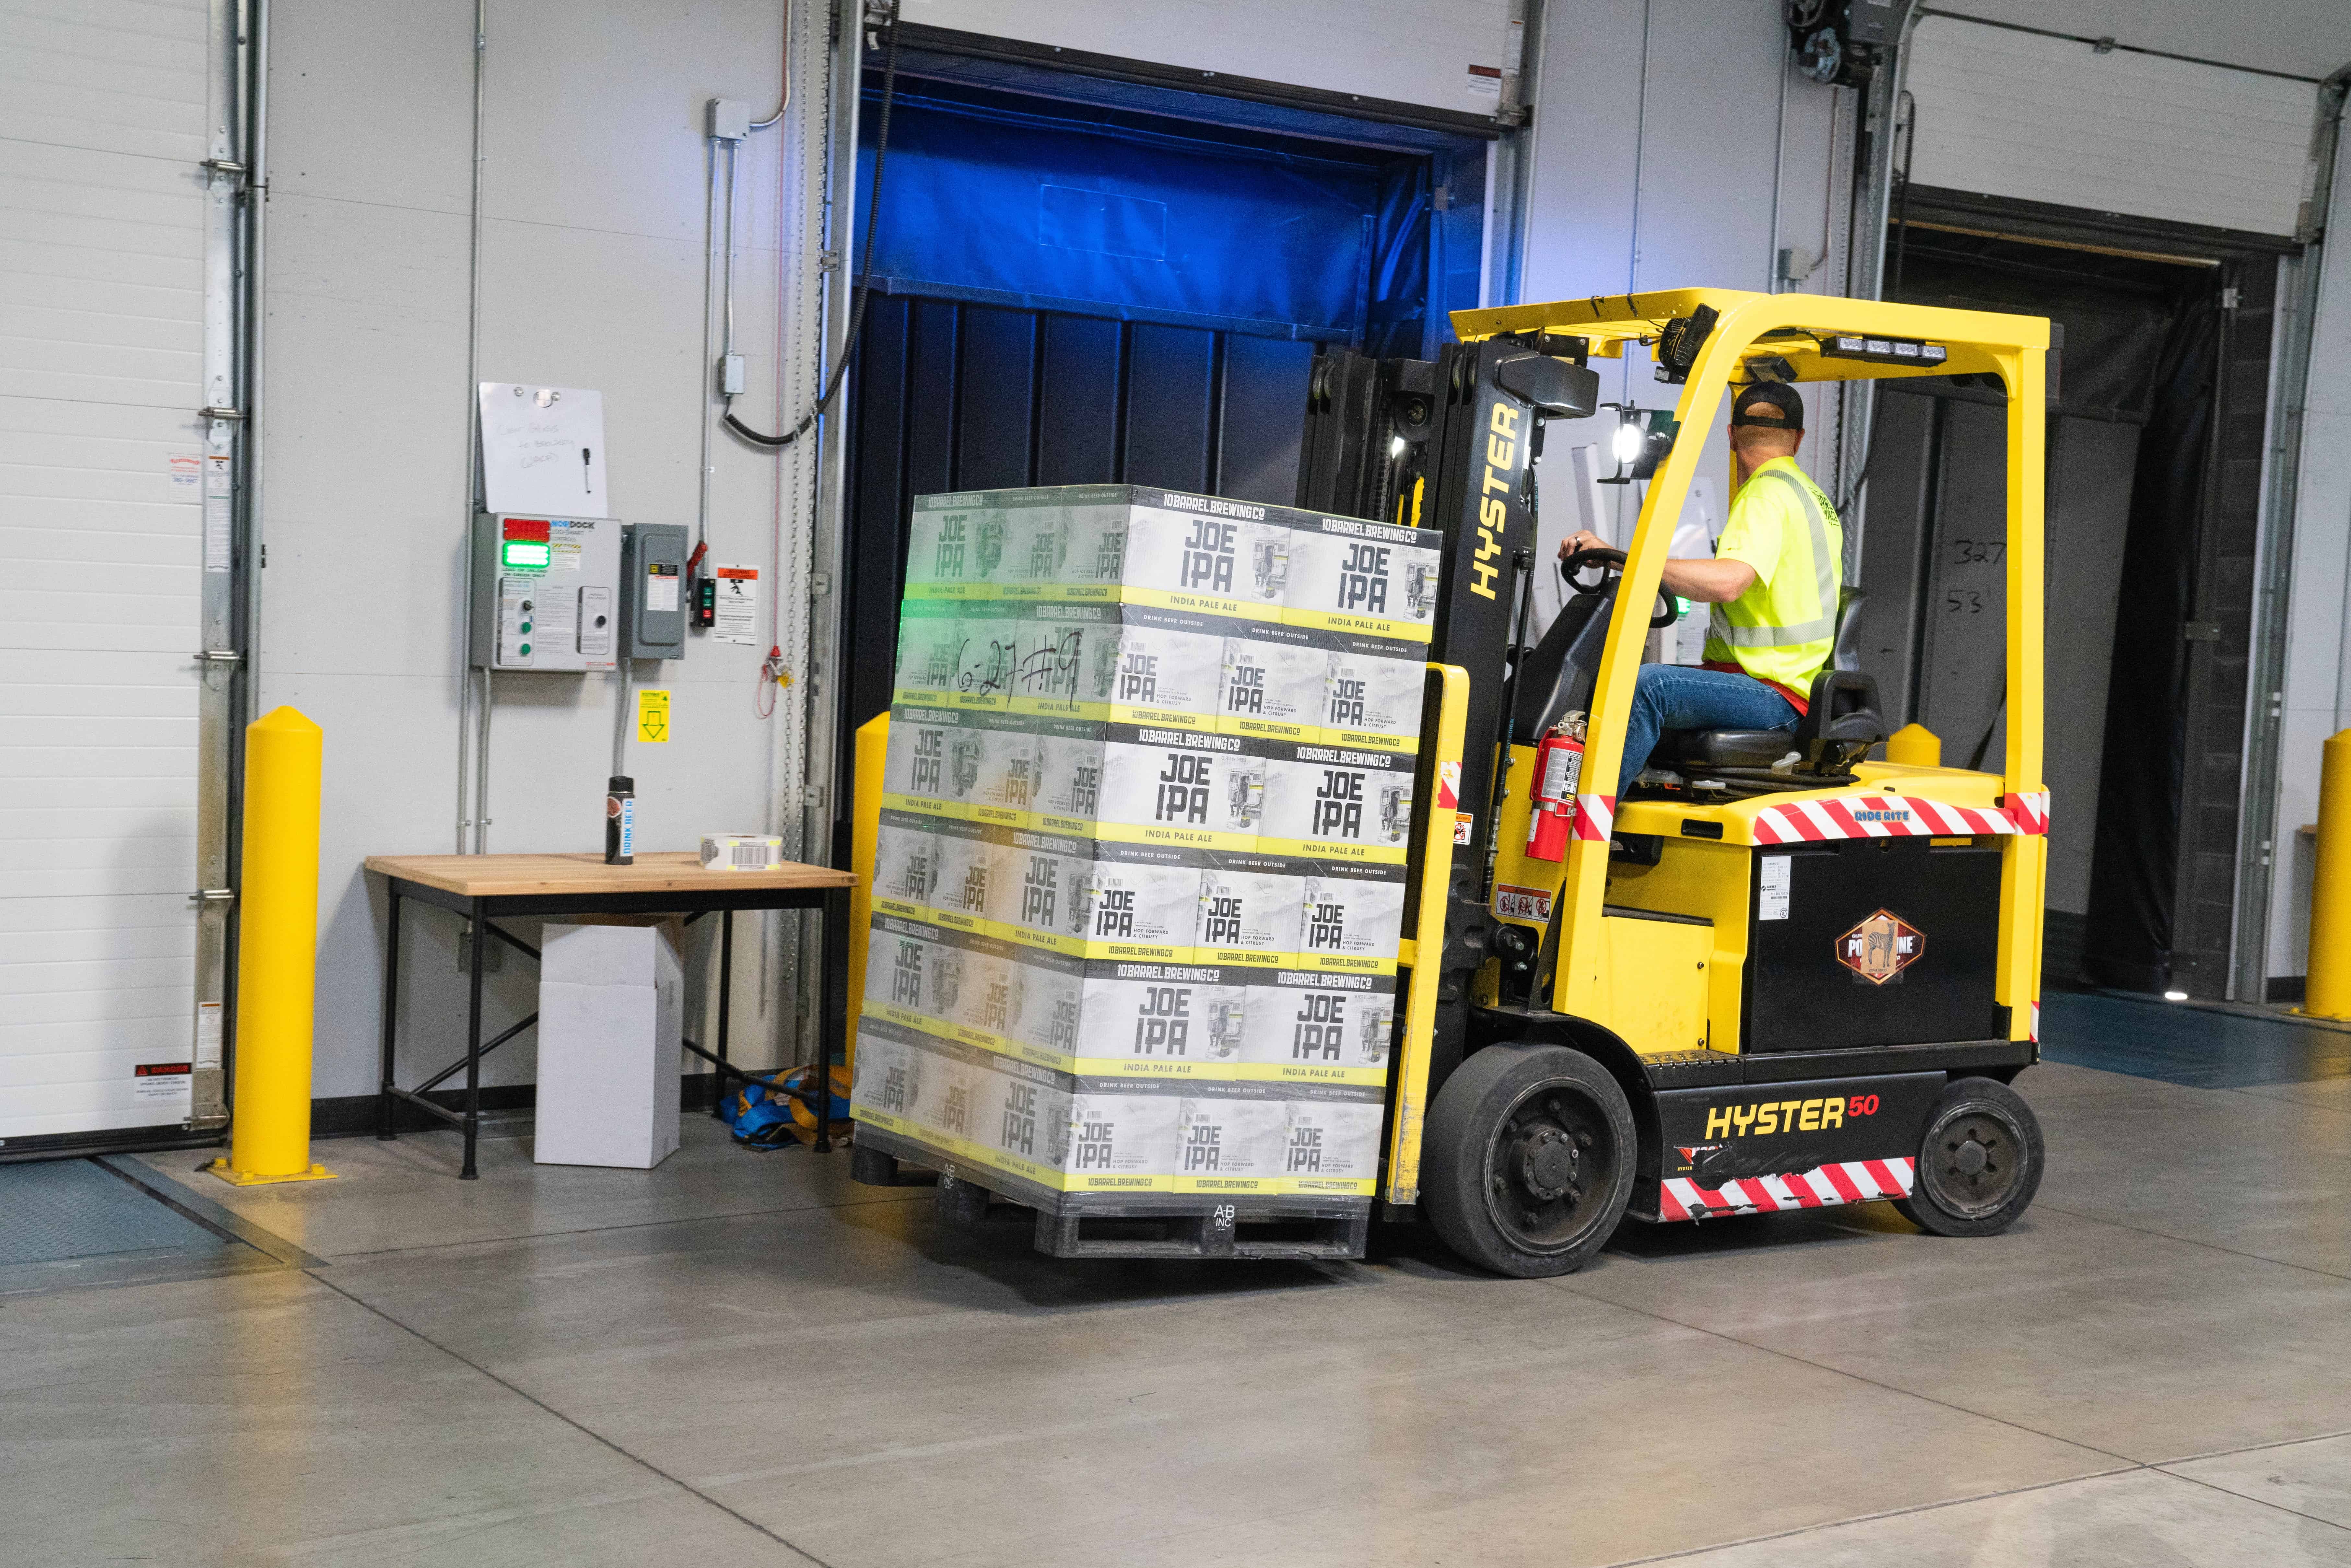 Physical Vs Digital: The Pros and Cons of Selling Each Online - Image credit - https://www.pexels.com/photo/man-riding-on-yellow-forklift-1267329/